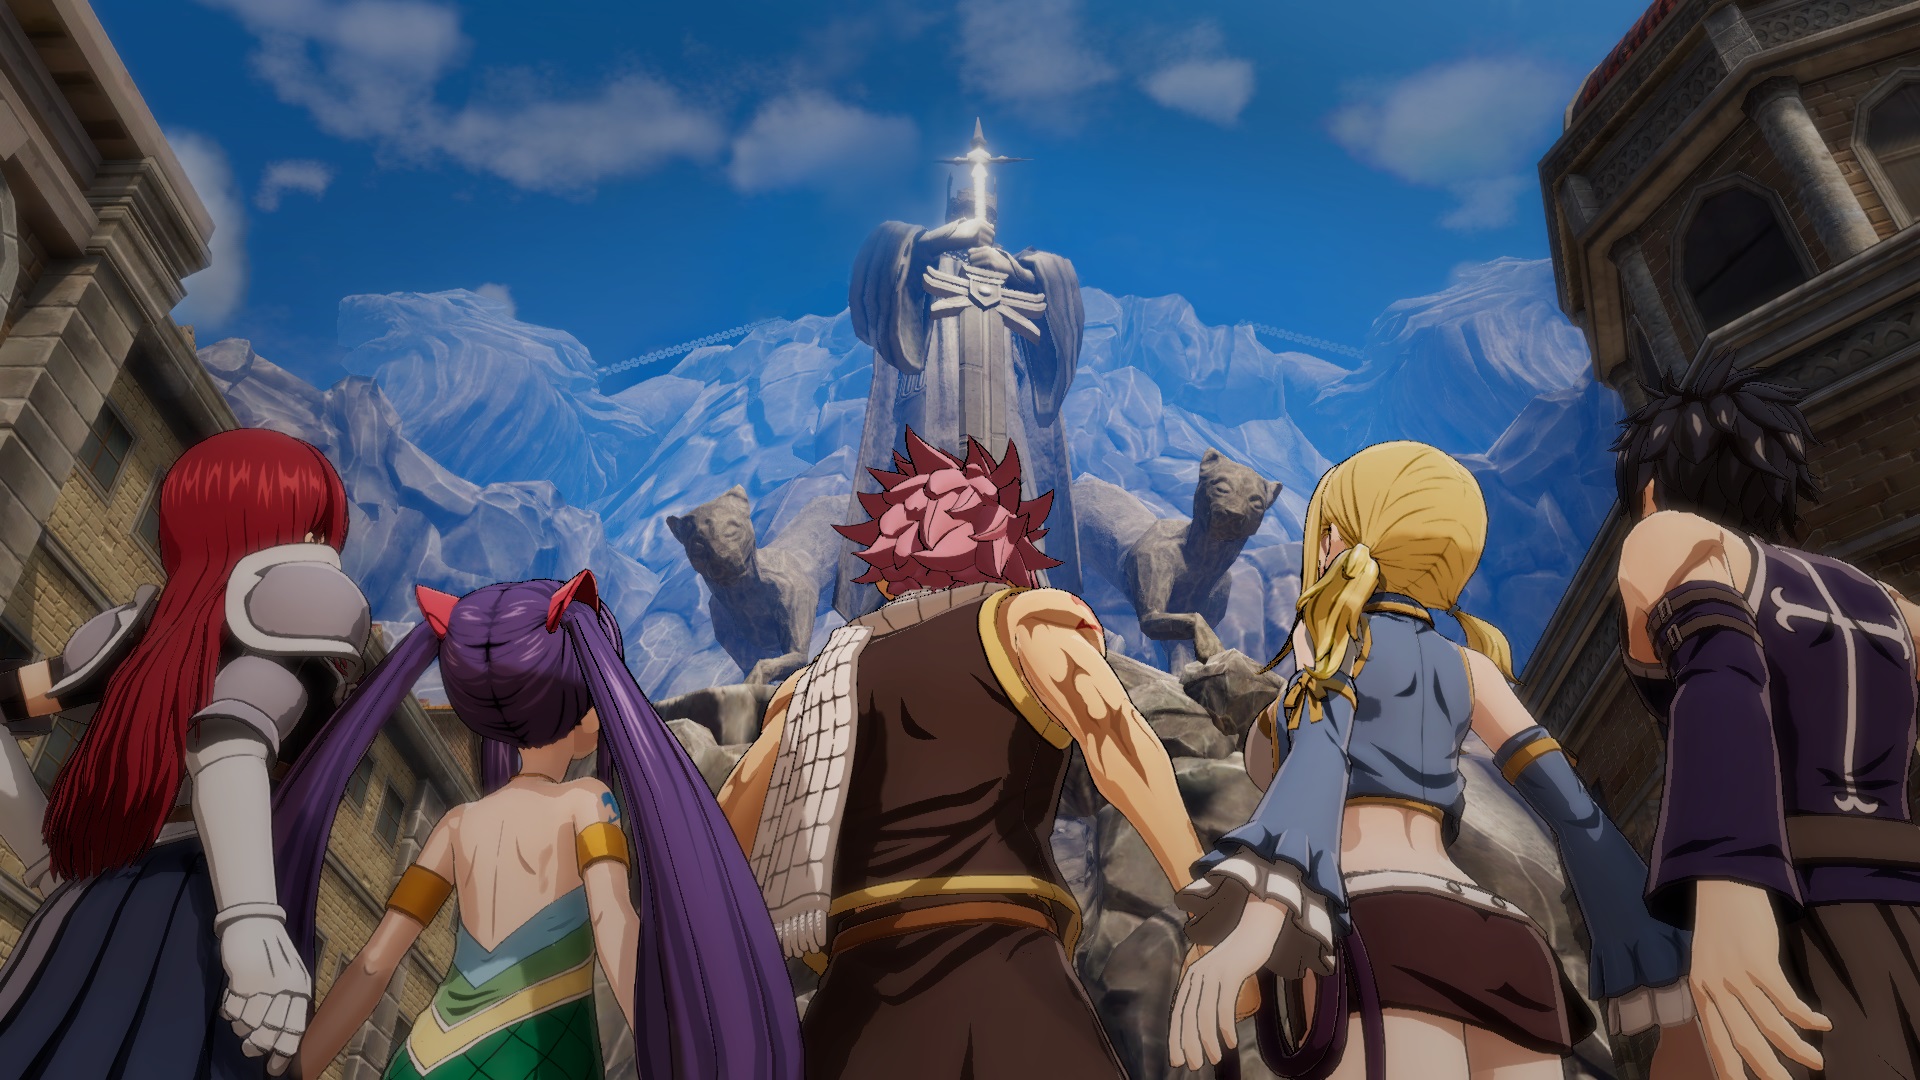 Download anime fairy tail full batch